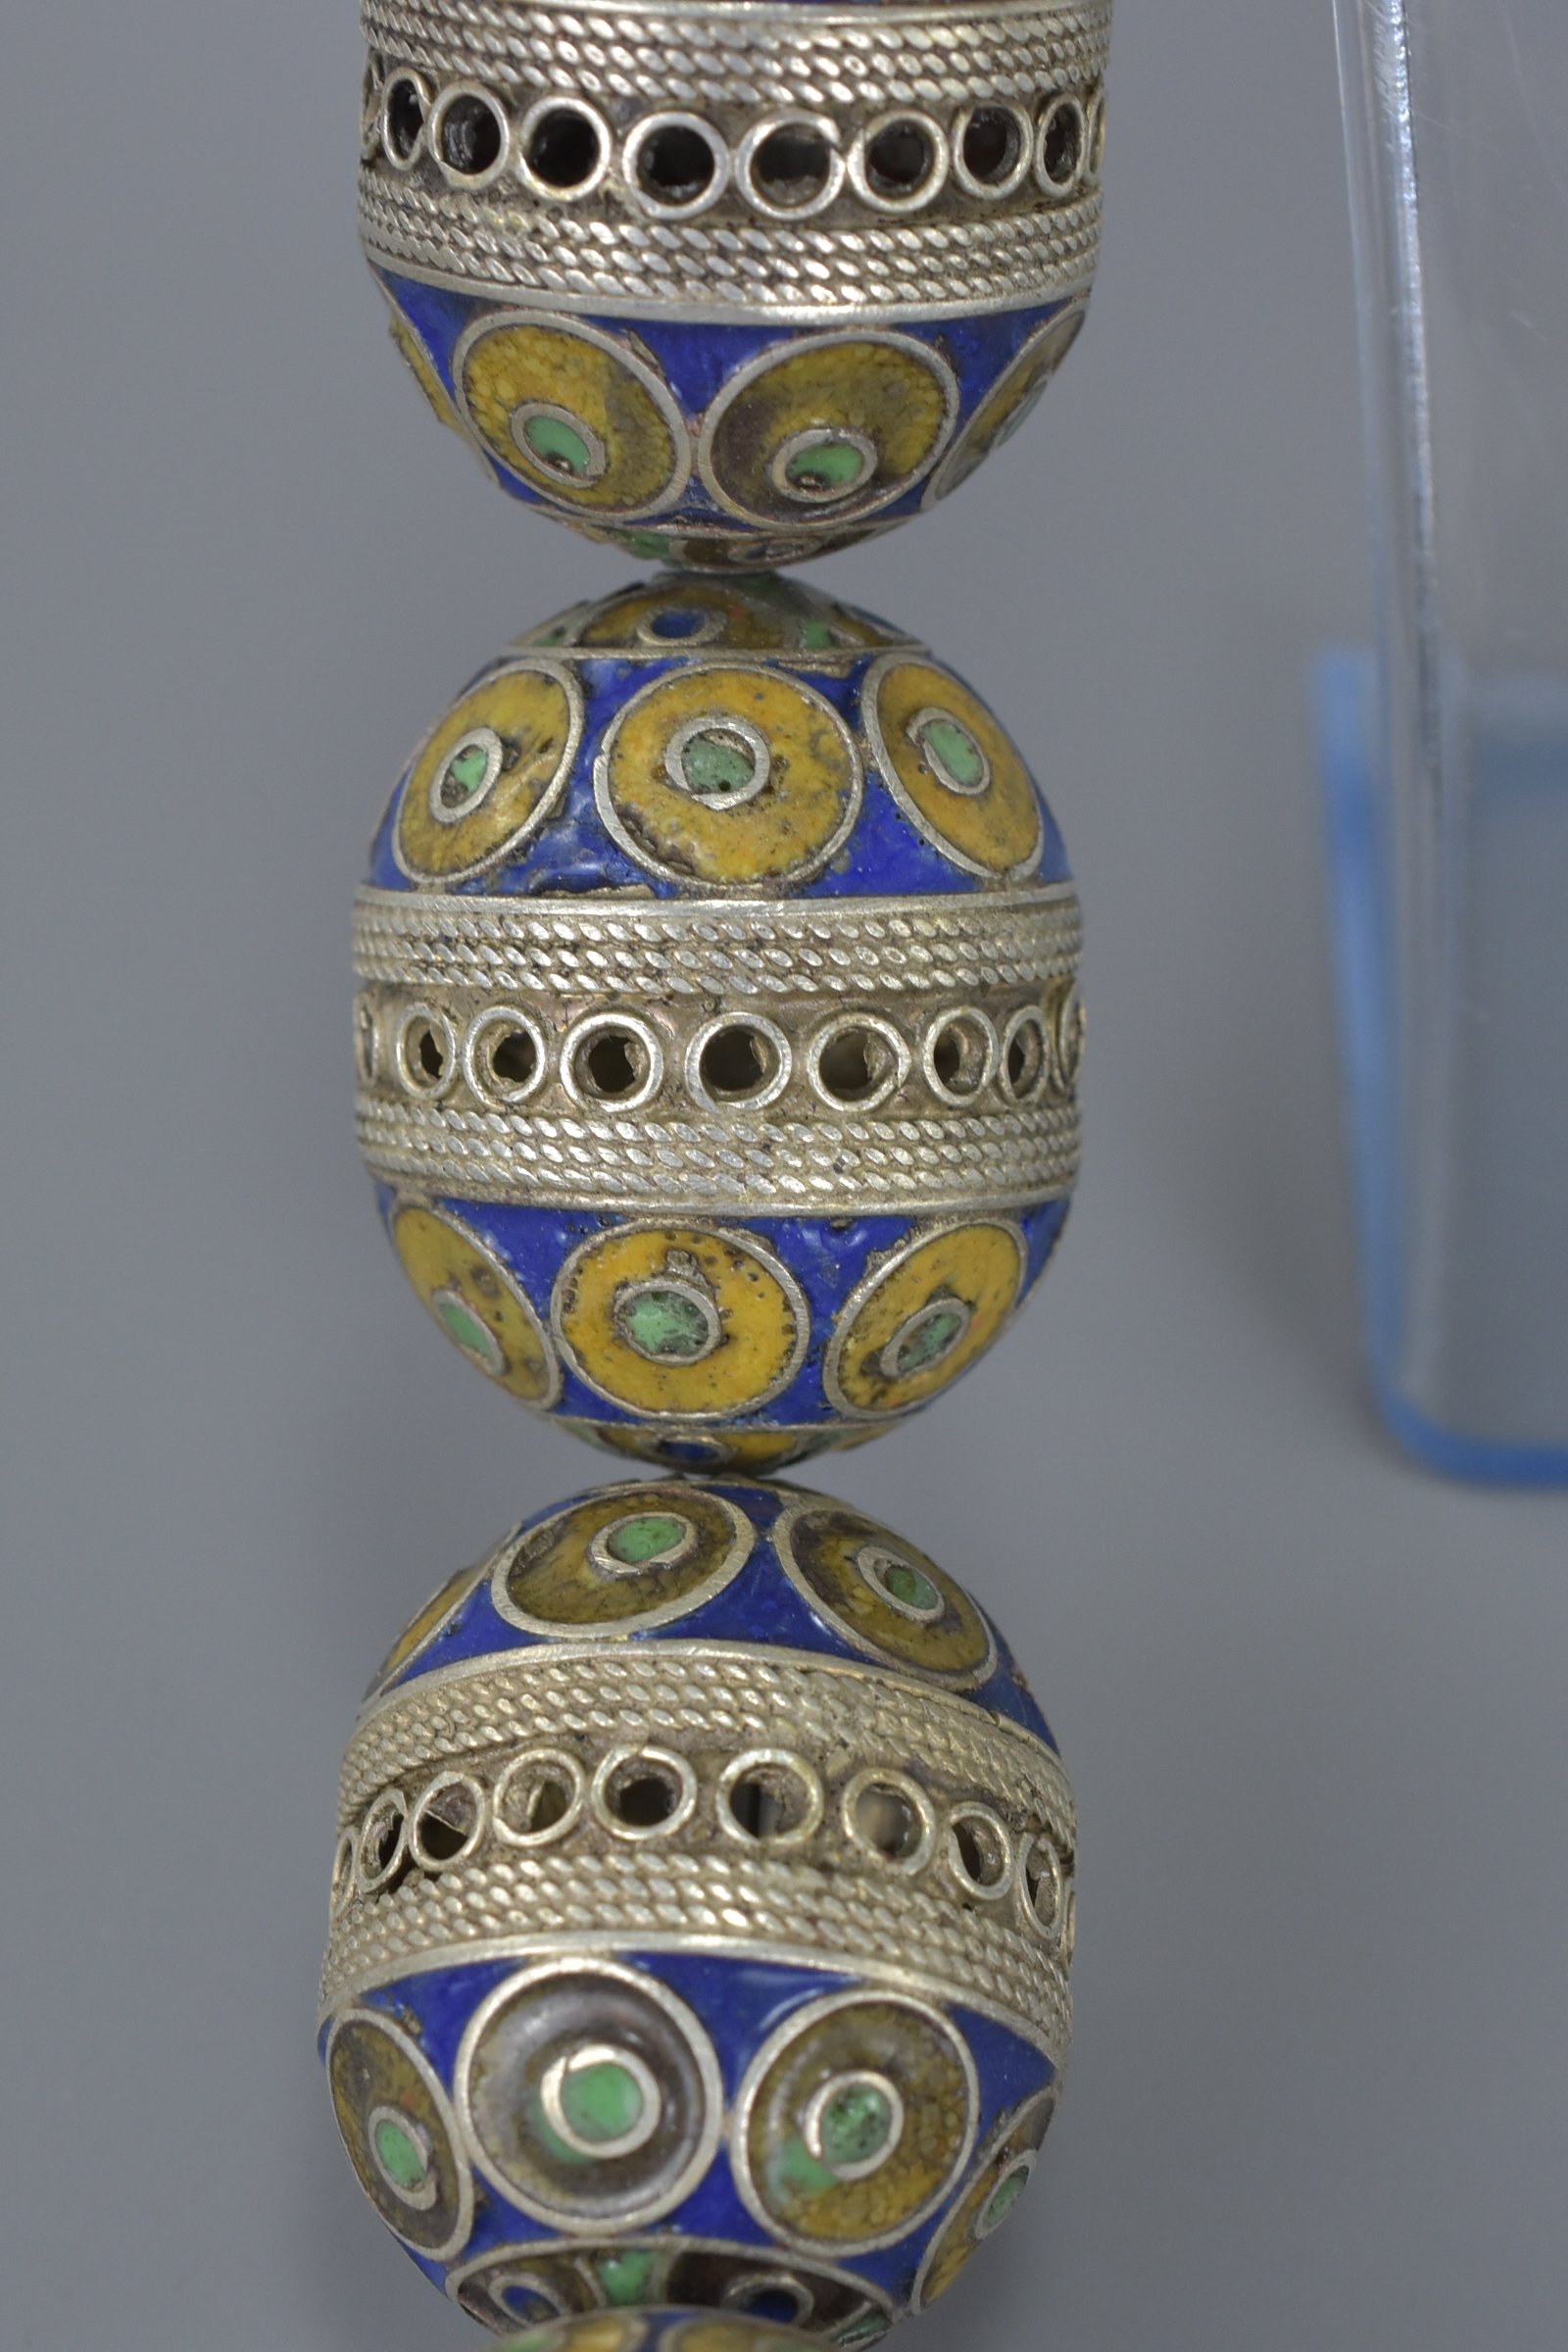 Two groups of Moroccan Berber enamel beads - Image 5 of 6